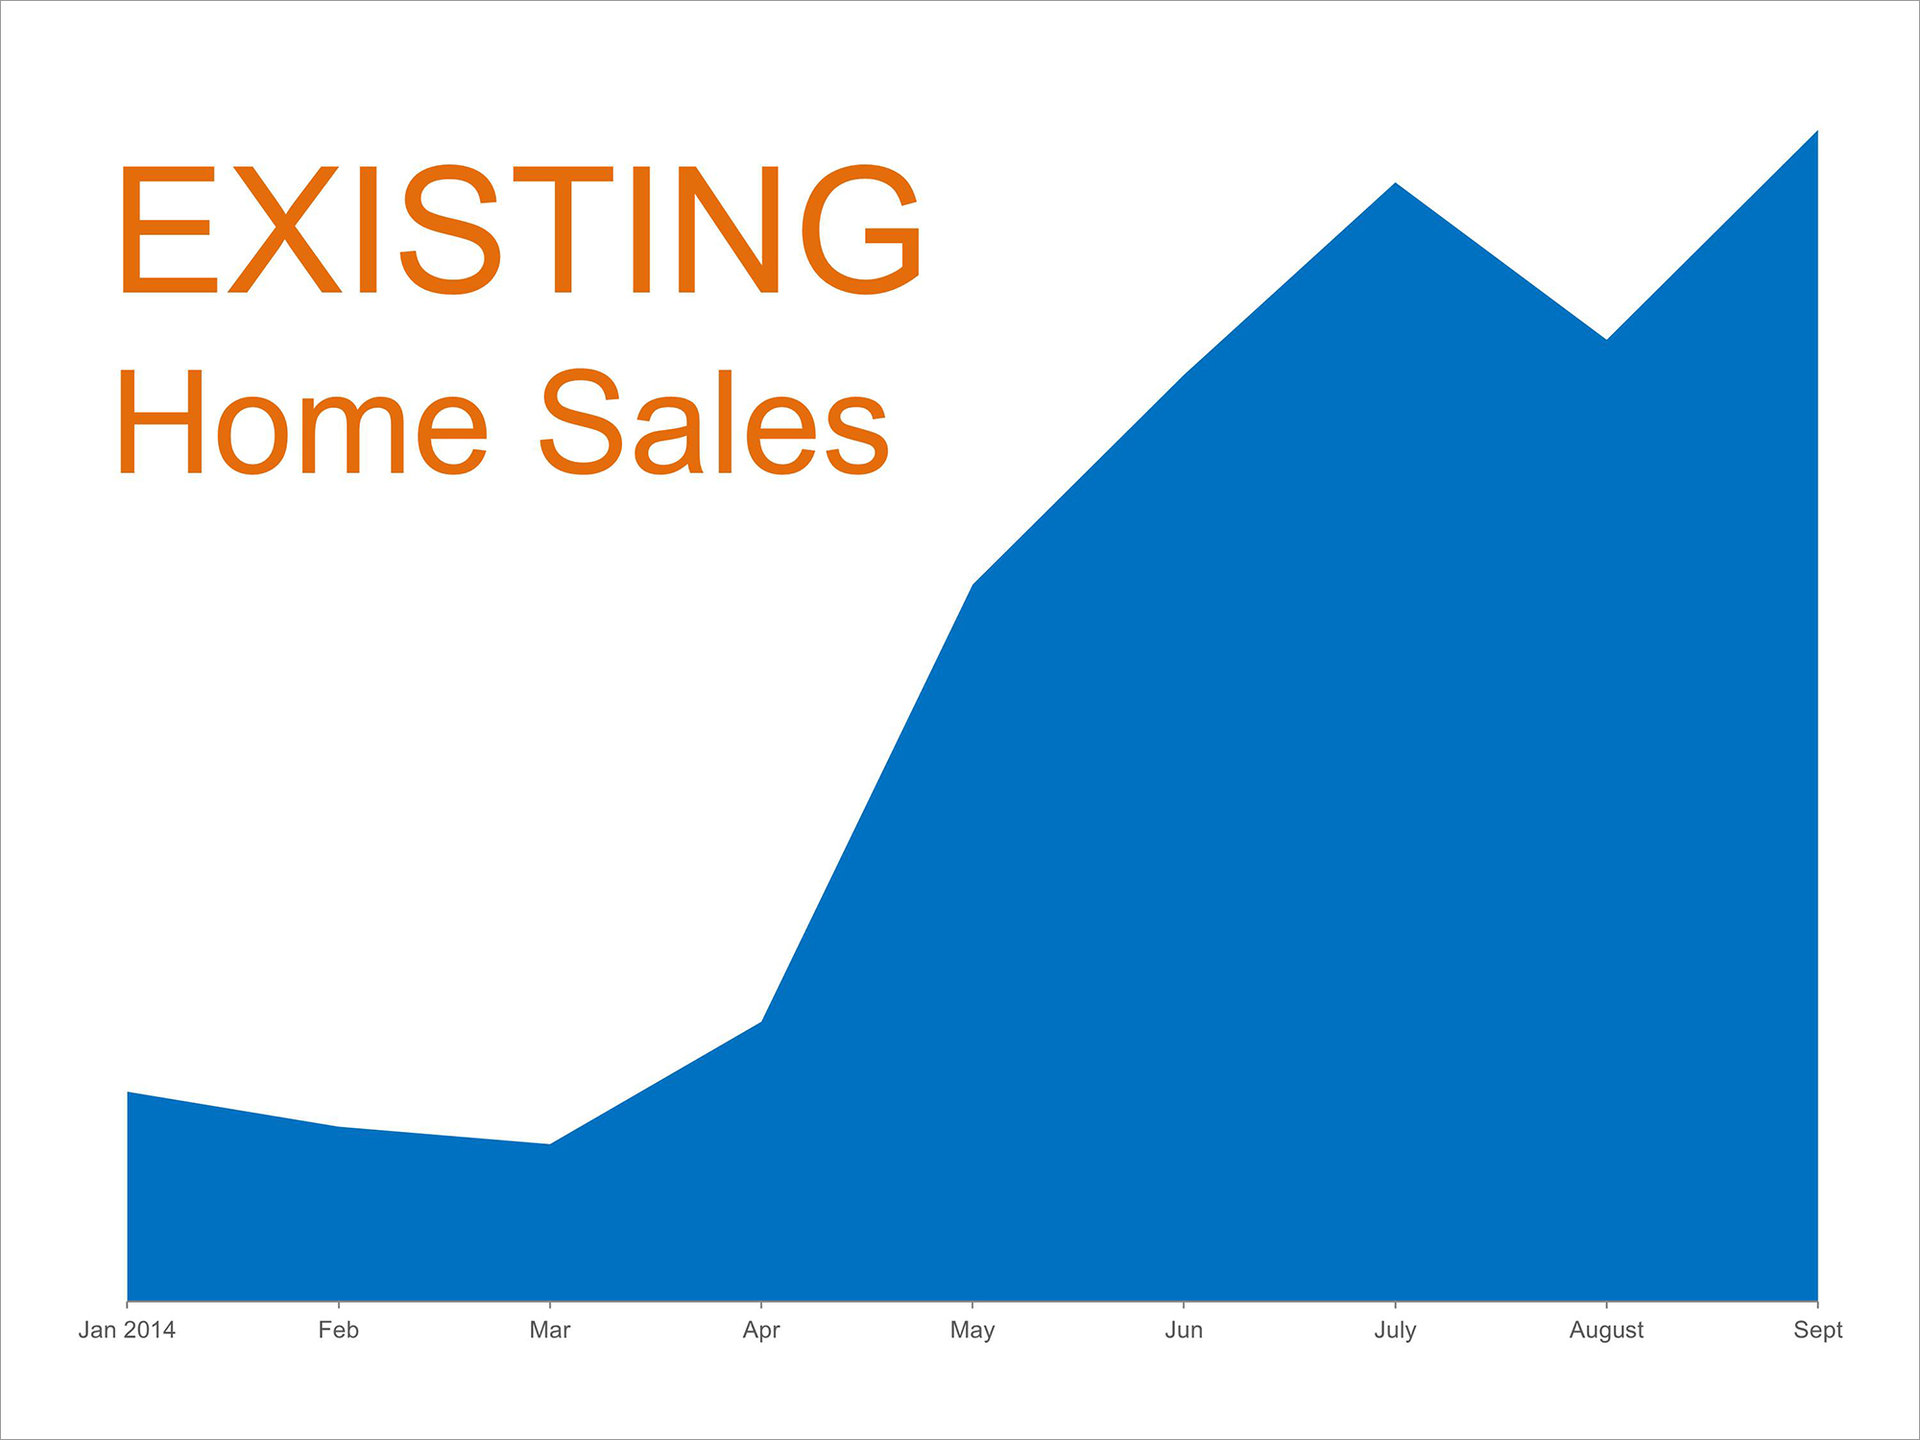 Home Sales Hit Highest Levels of 2014 | Keeping Current Matters